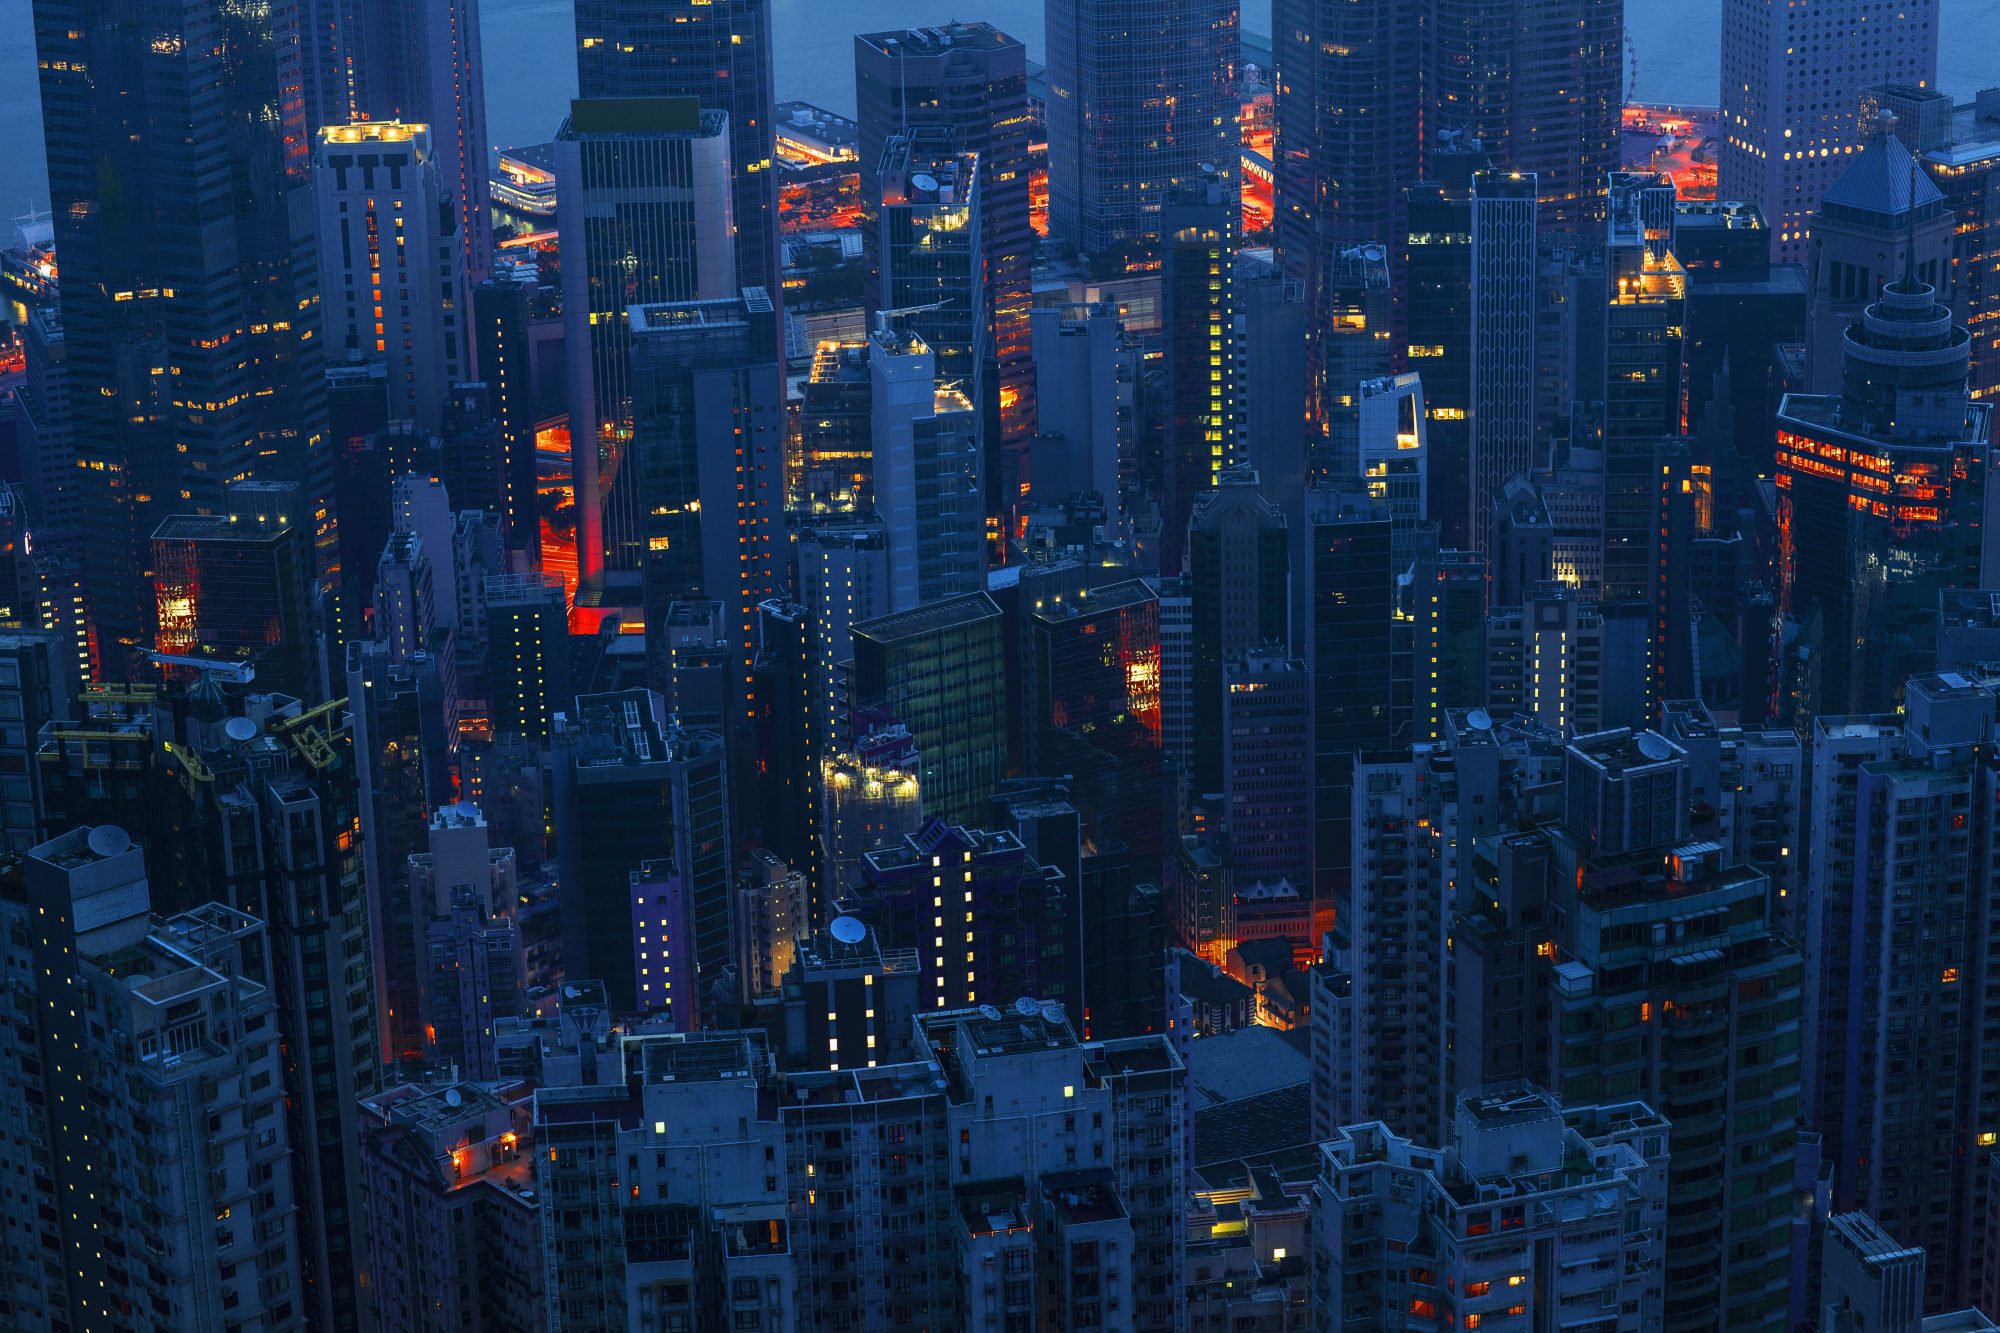 Hong Kong's Mid Levels and Central District neighborhood seen from Victoria Peak, China